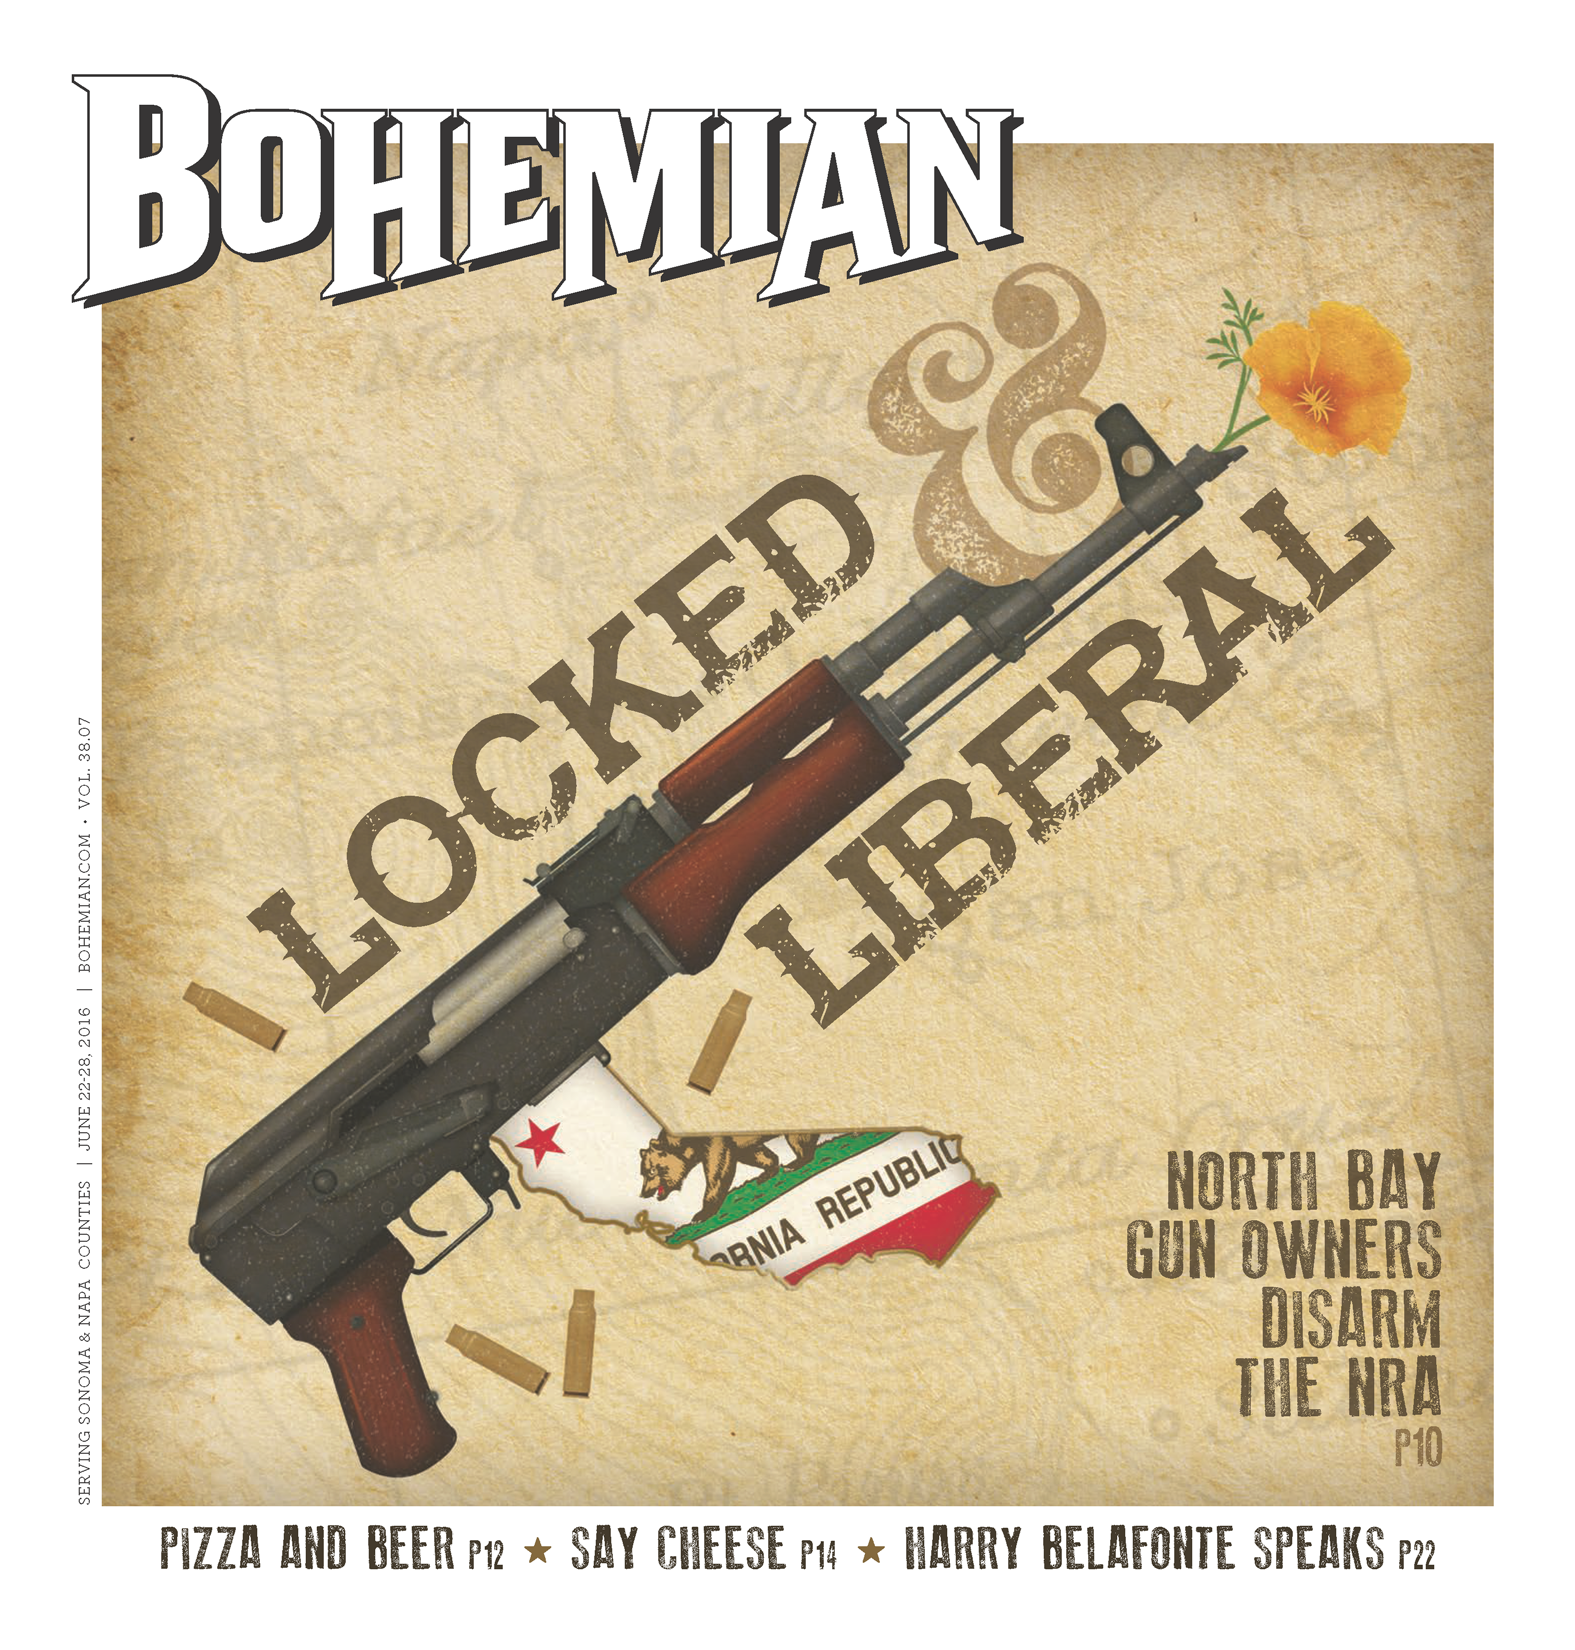 Weekly magazine with California gun rights cover feature